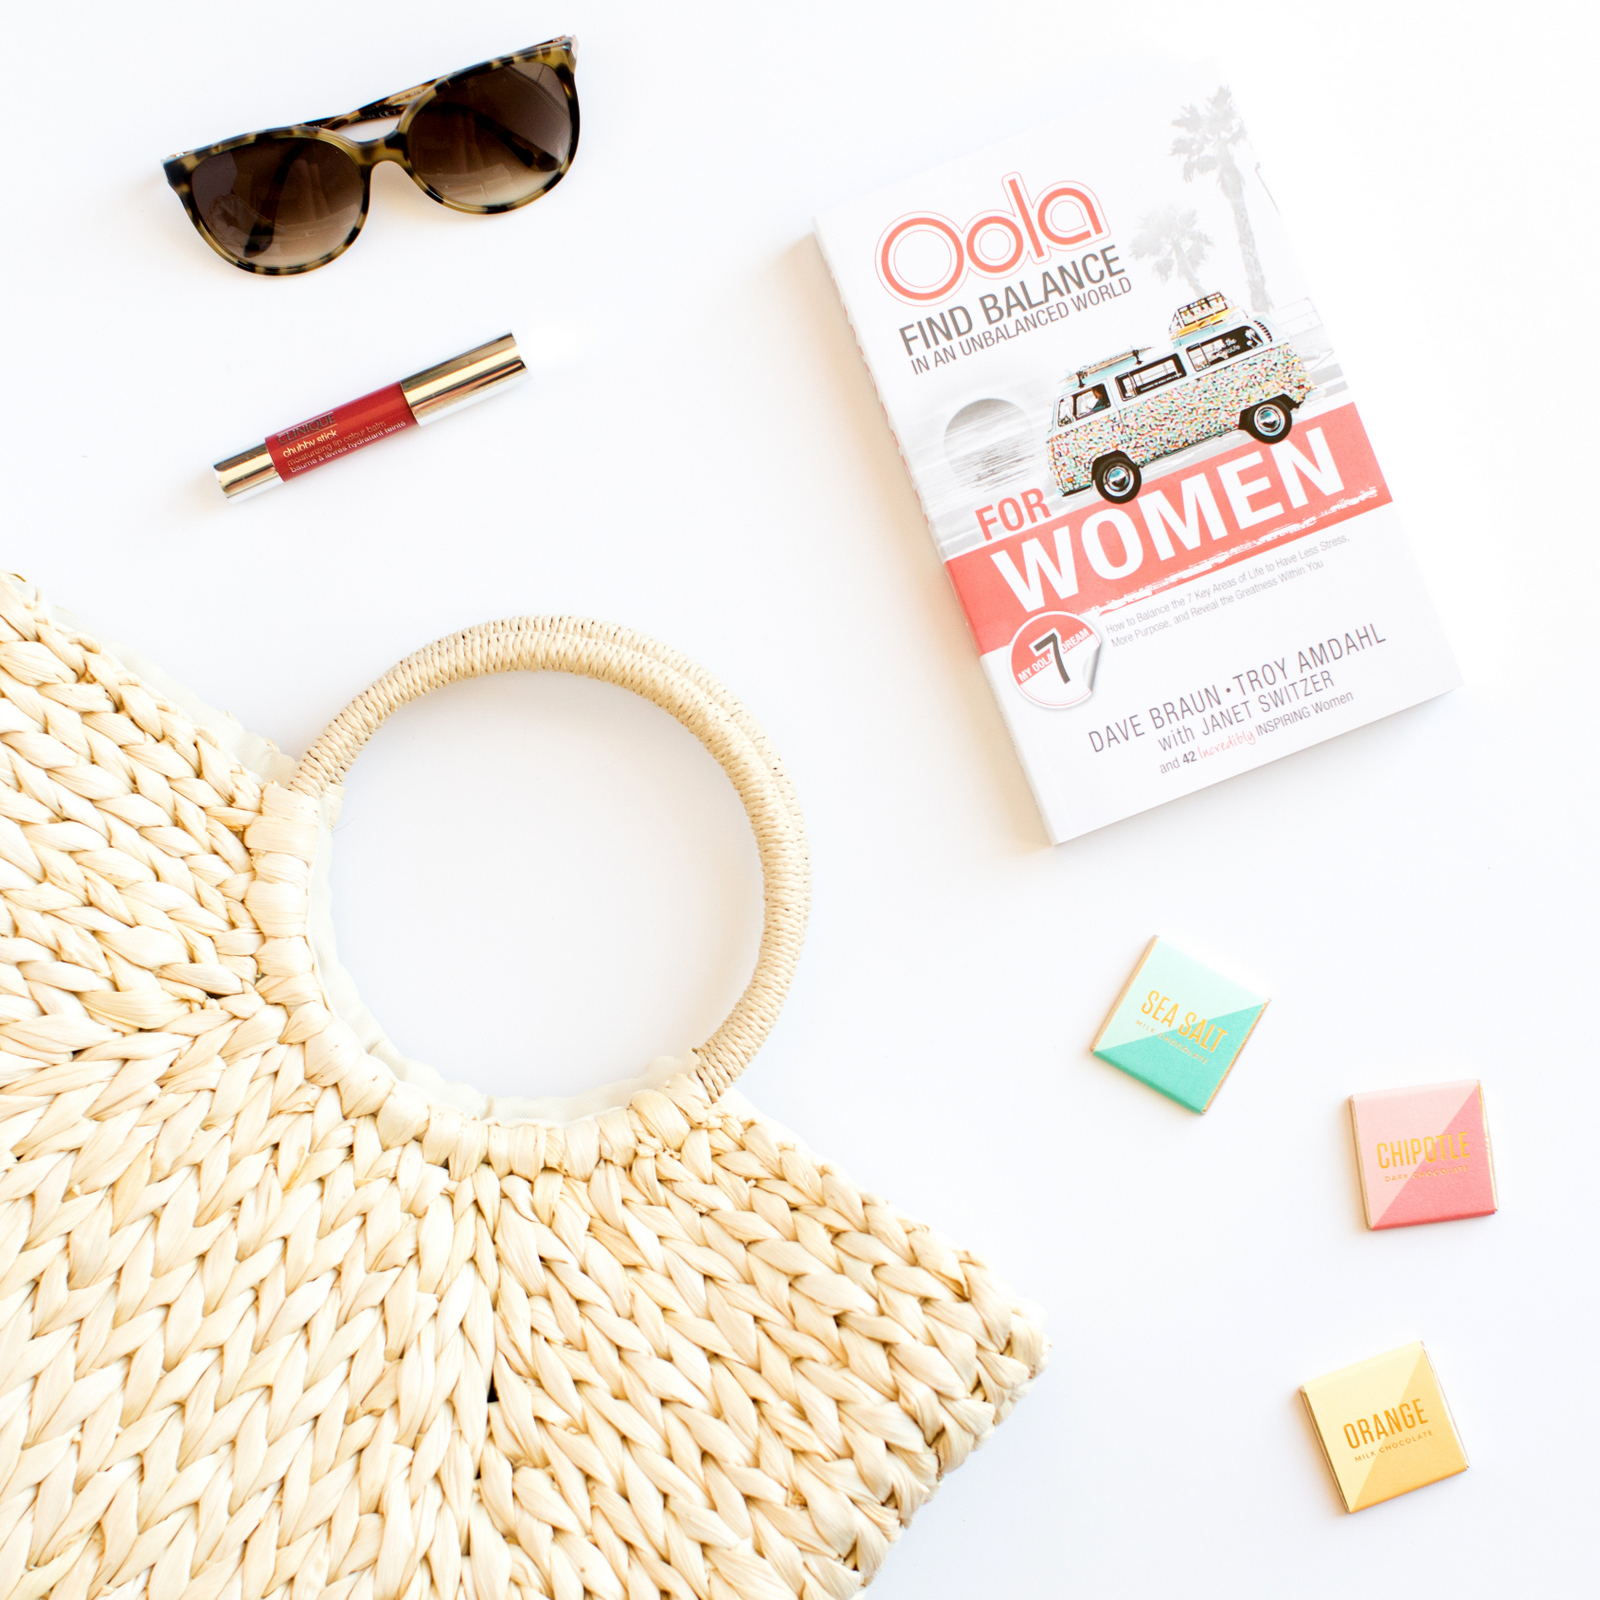 oola for women book